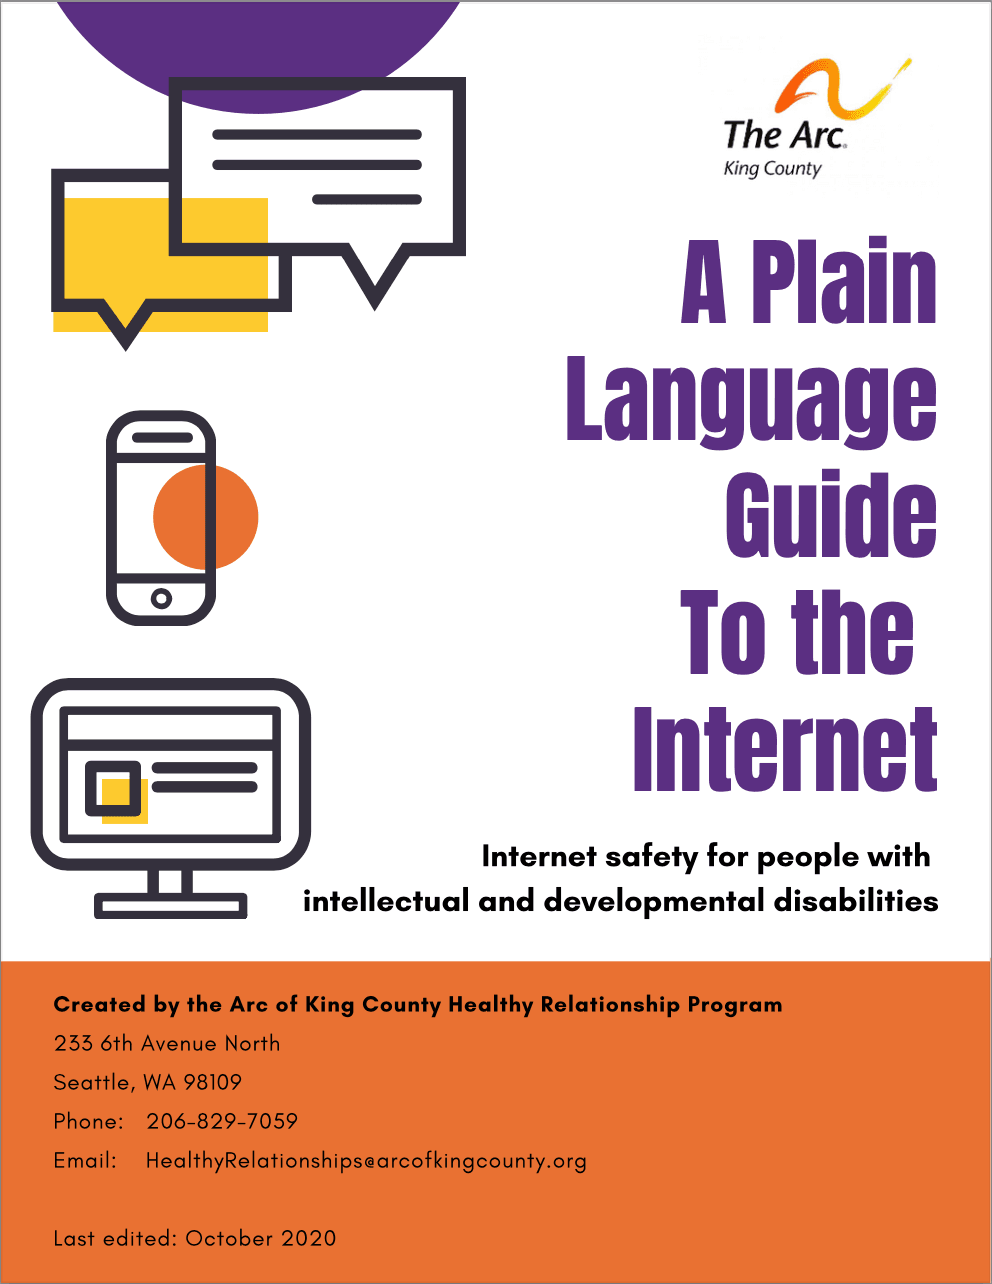 A Plain Language Guide to the Internet